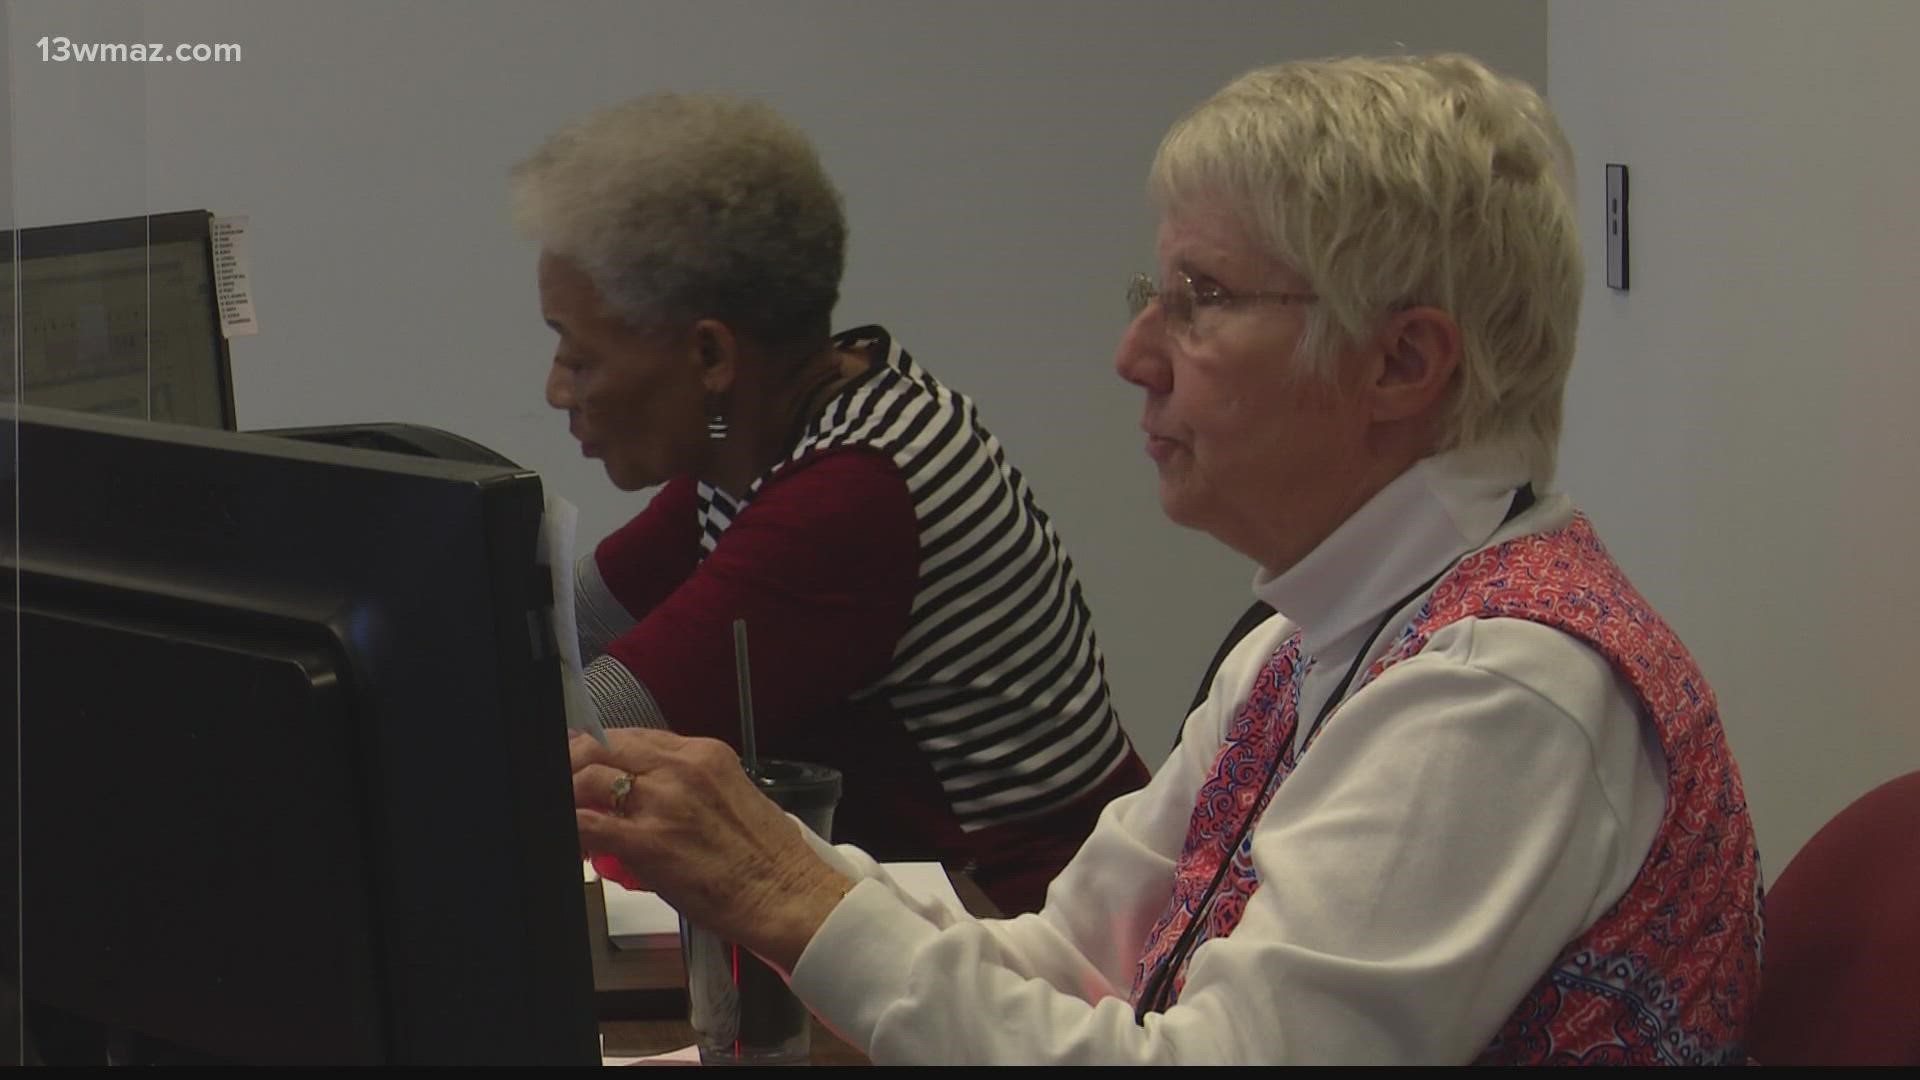 Susan Rooks has been working at the Laurens County Board of Registrars since 1991. She says she  enjoys working with people, and letting them know they can vote.